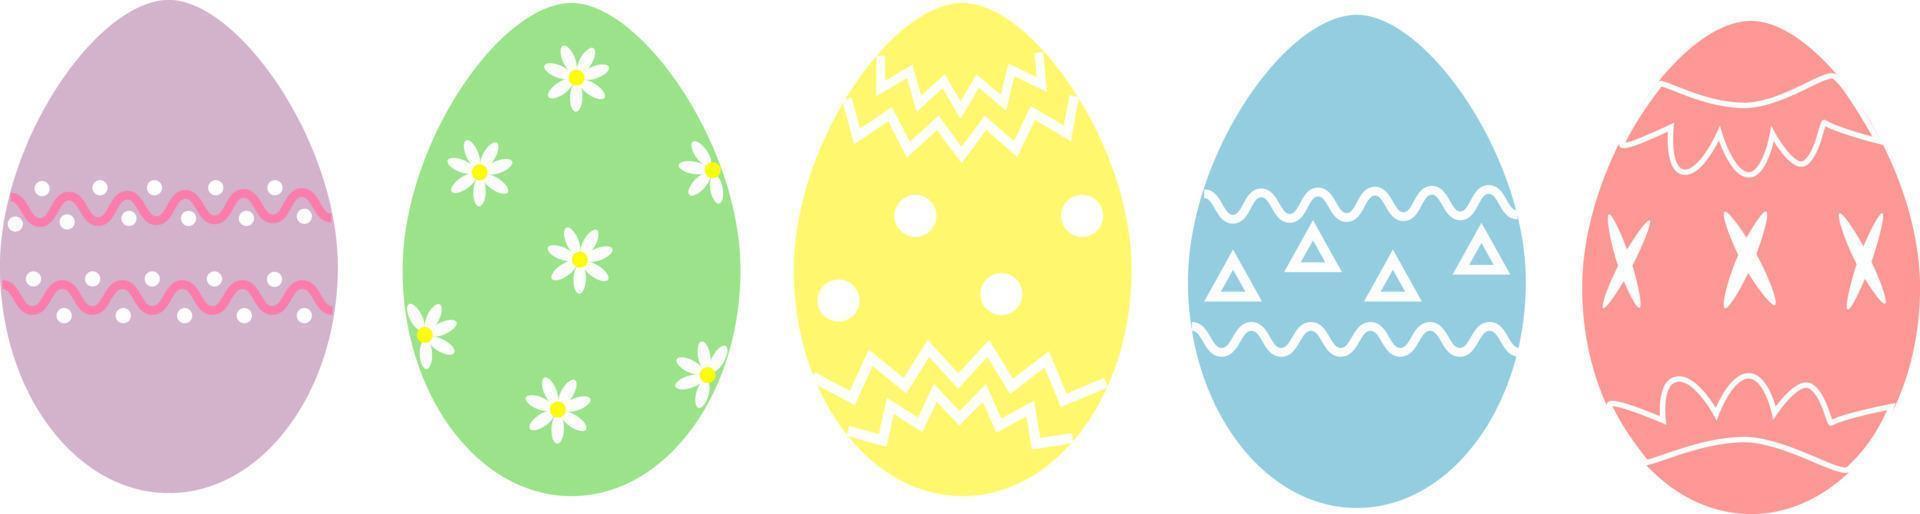 Easter web banner with colorful painted Easter eggs. Easter eggs with different texture. Vector illustration EPS10